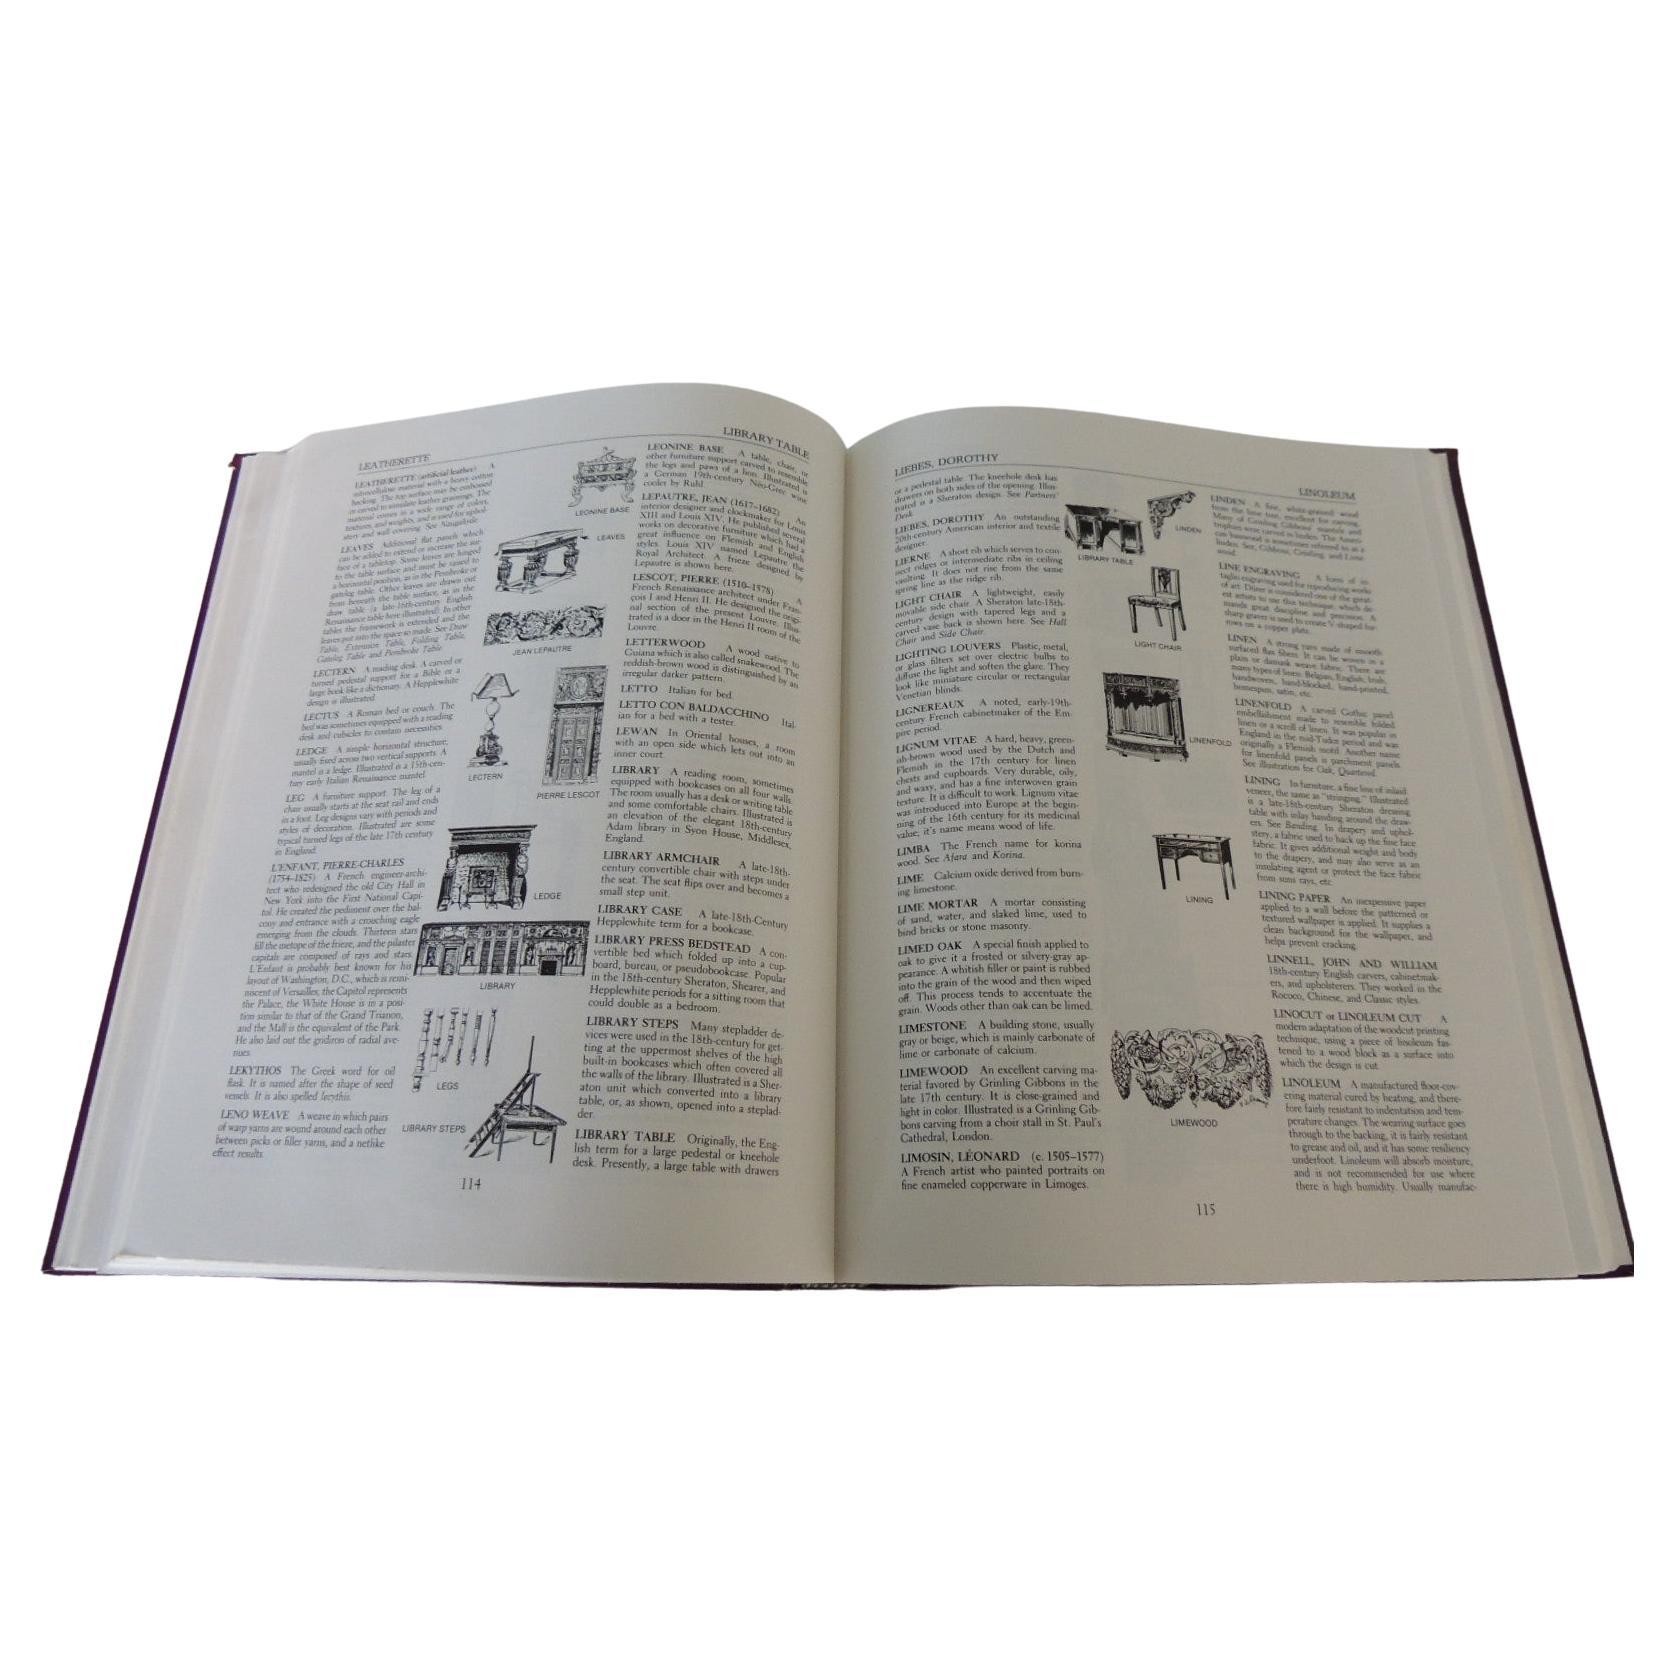 The Dictionary of Interior Design by M. Pegler Publisher ‏ : ‎ 
Fairchild Books (May 1, 1983)
Language ‏ : ‎ English
Hardcover ‏ : ‎ 217 pages
